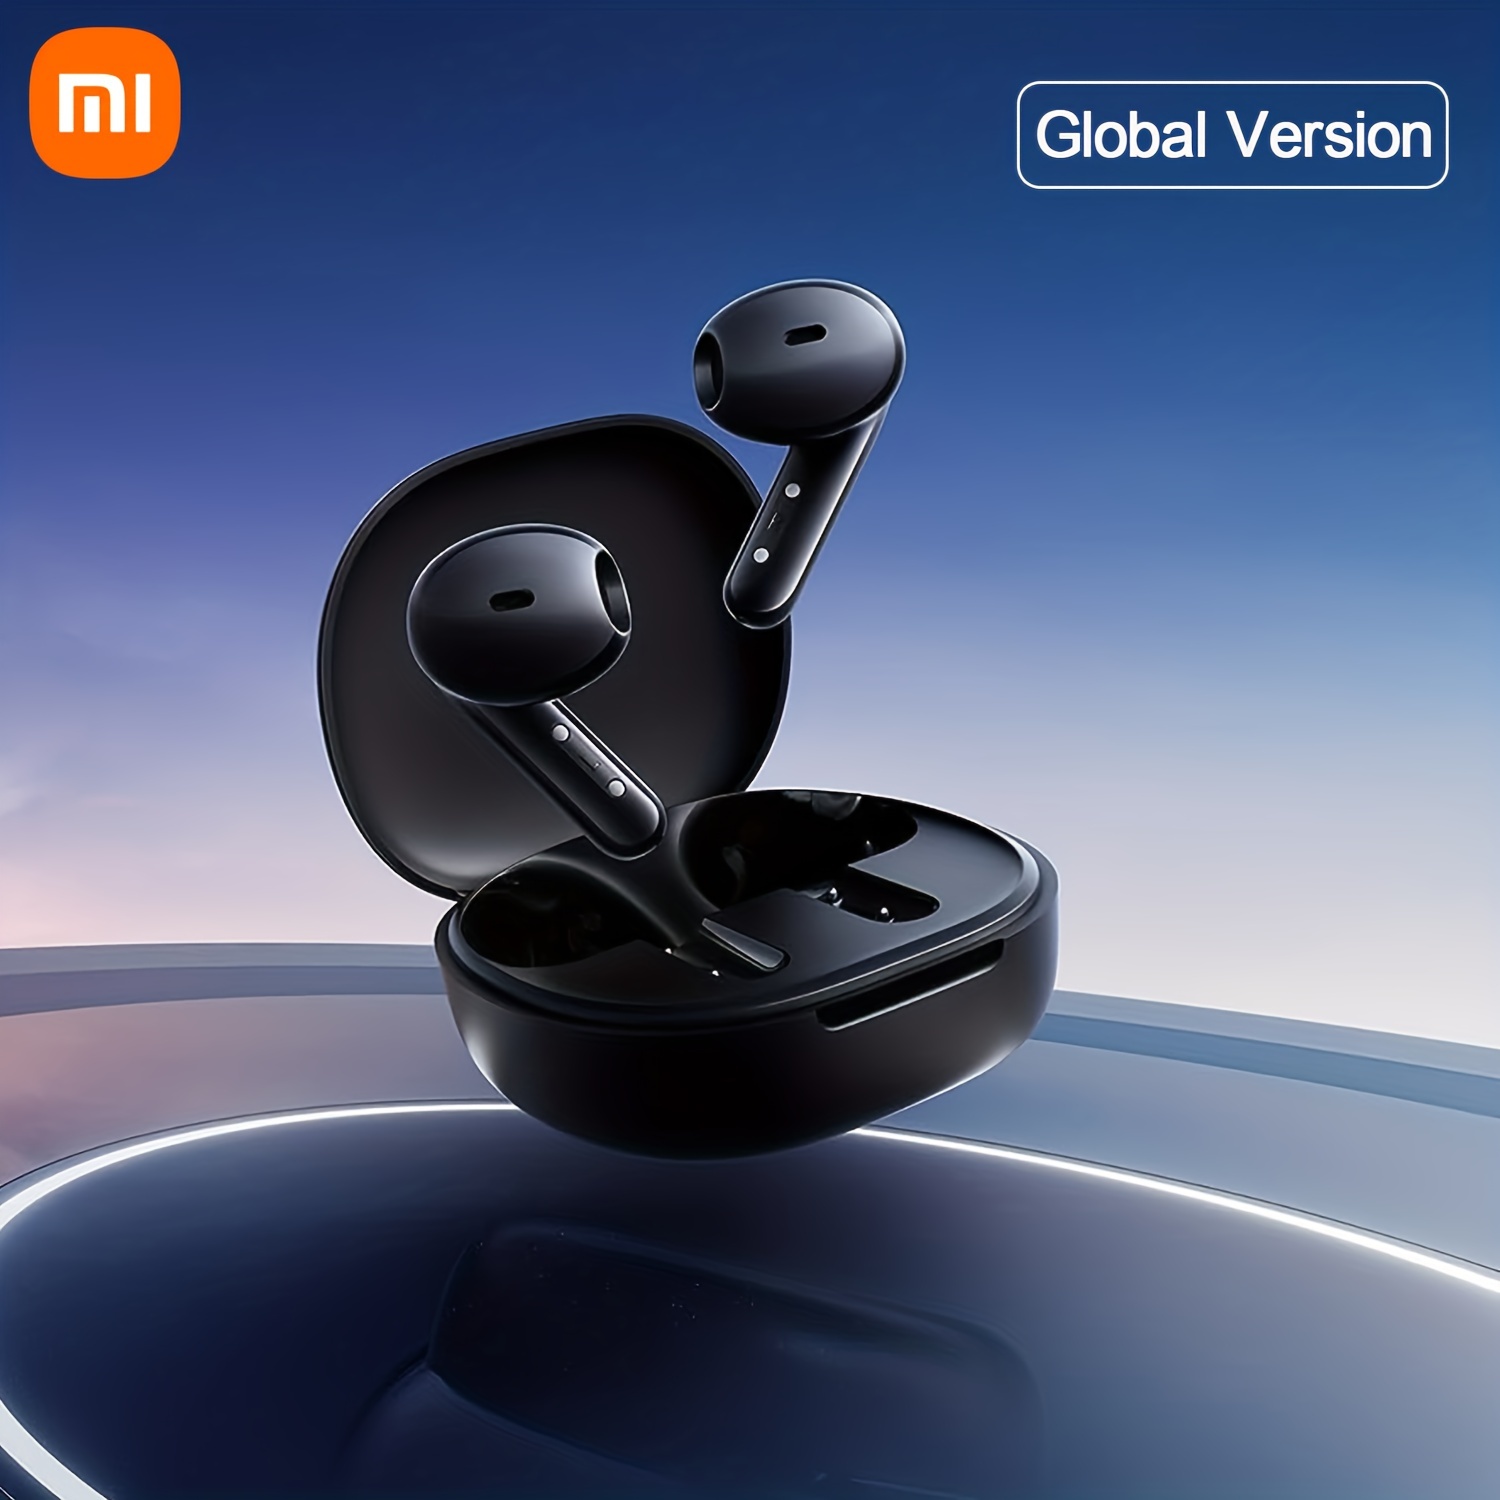 Xiaomi Xiaomi Redmi Buds 4 Pro Wireless, Bluetooth 5.3 Earbuds, Up To 43dB  Hybrid ANC, Up To 36 Hours Long Battery Life, 3-Mic Noise Reduction For  Calls, In-Ear Detection, Dual Transparency Modes